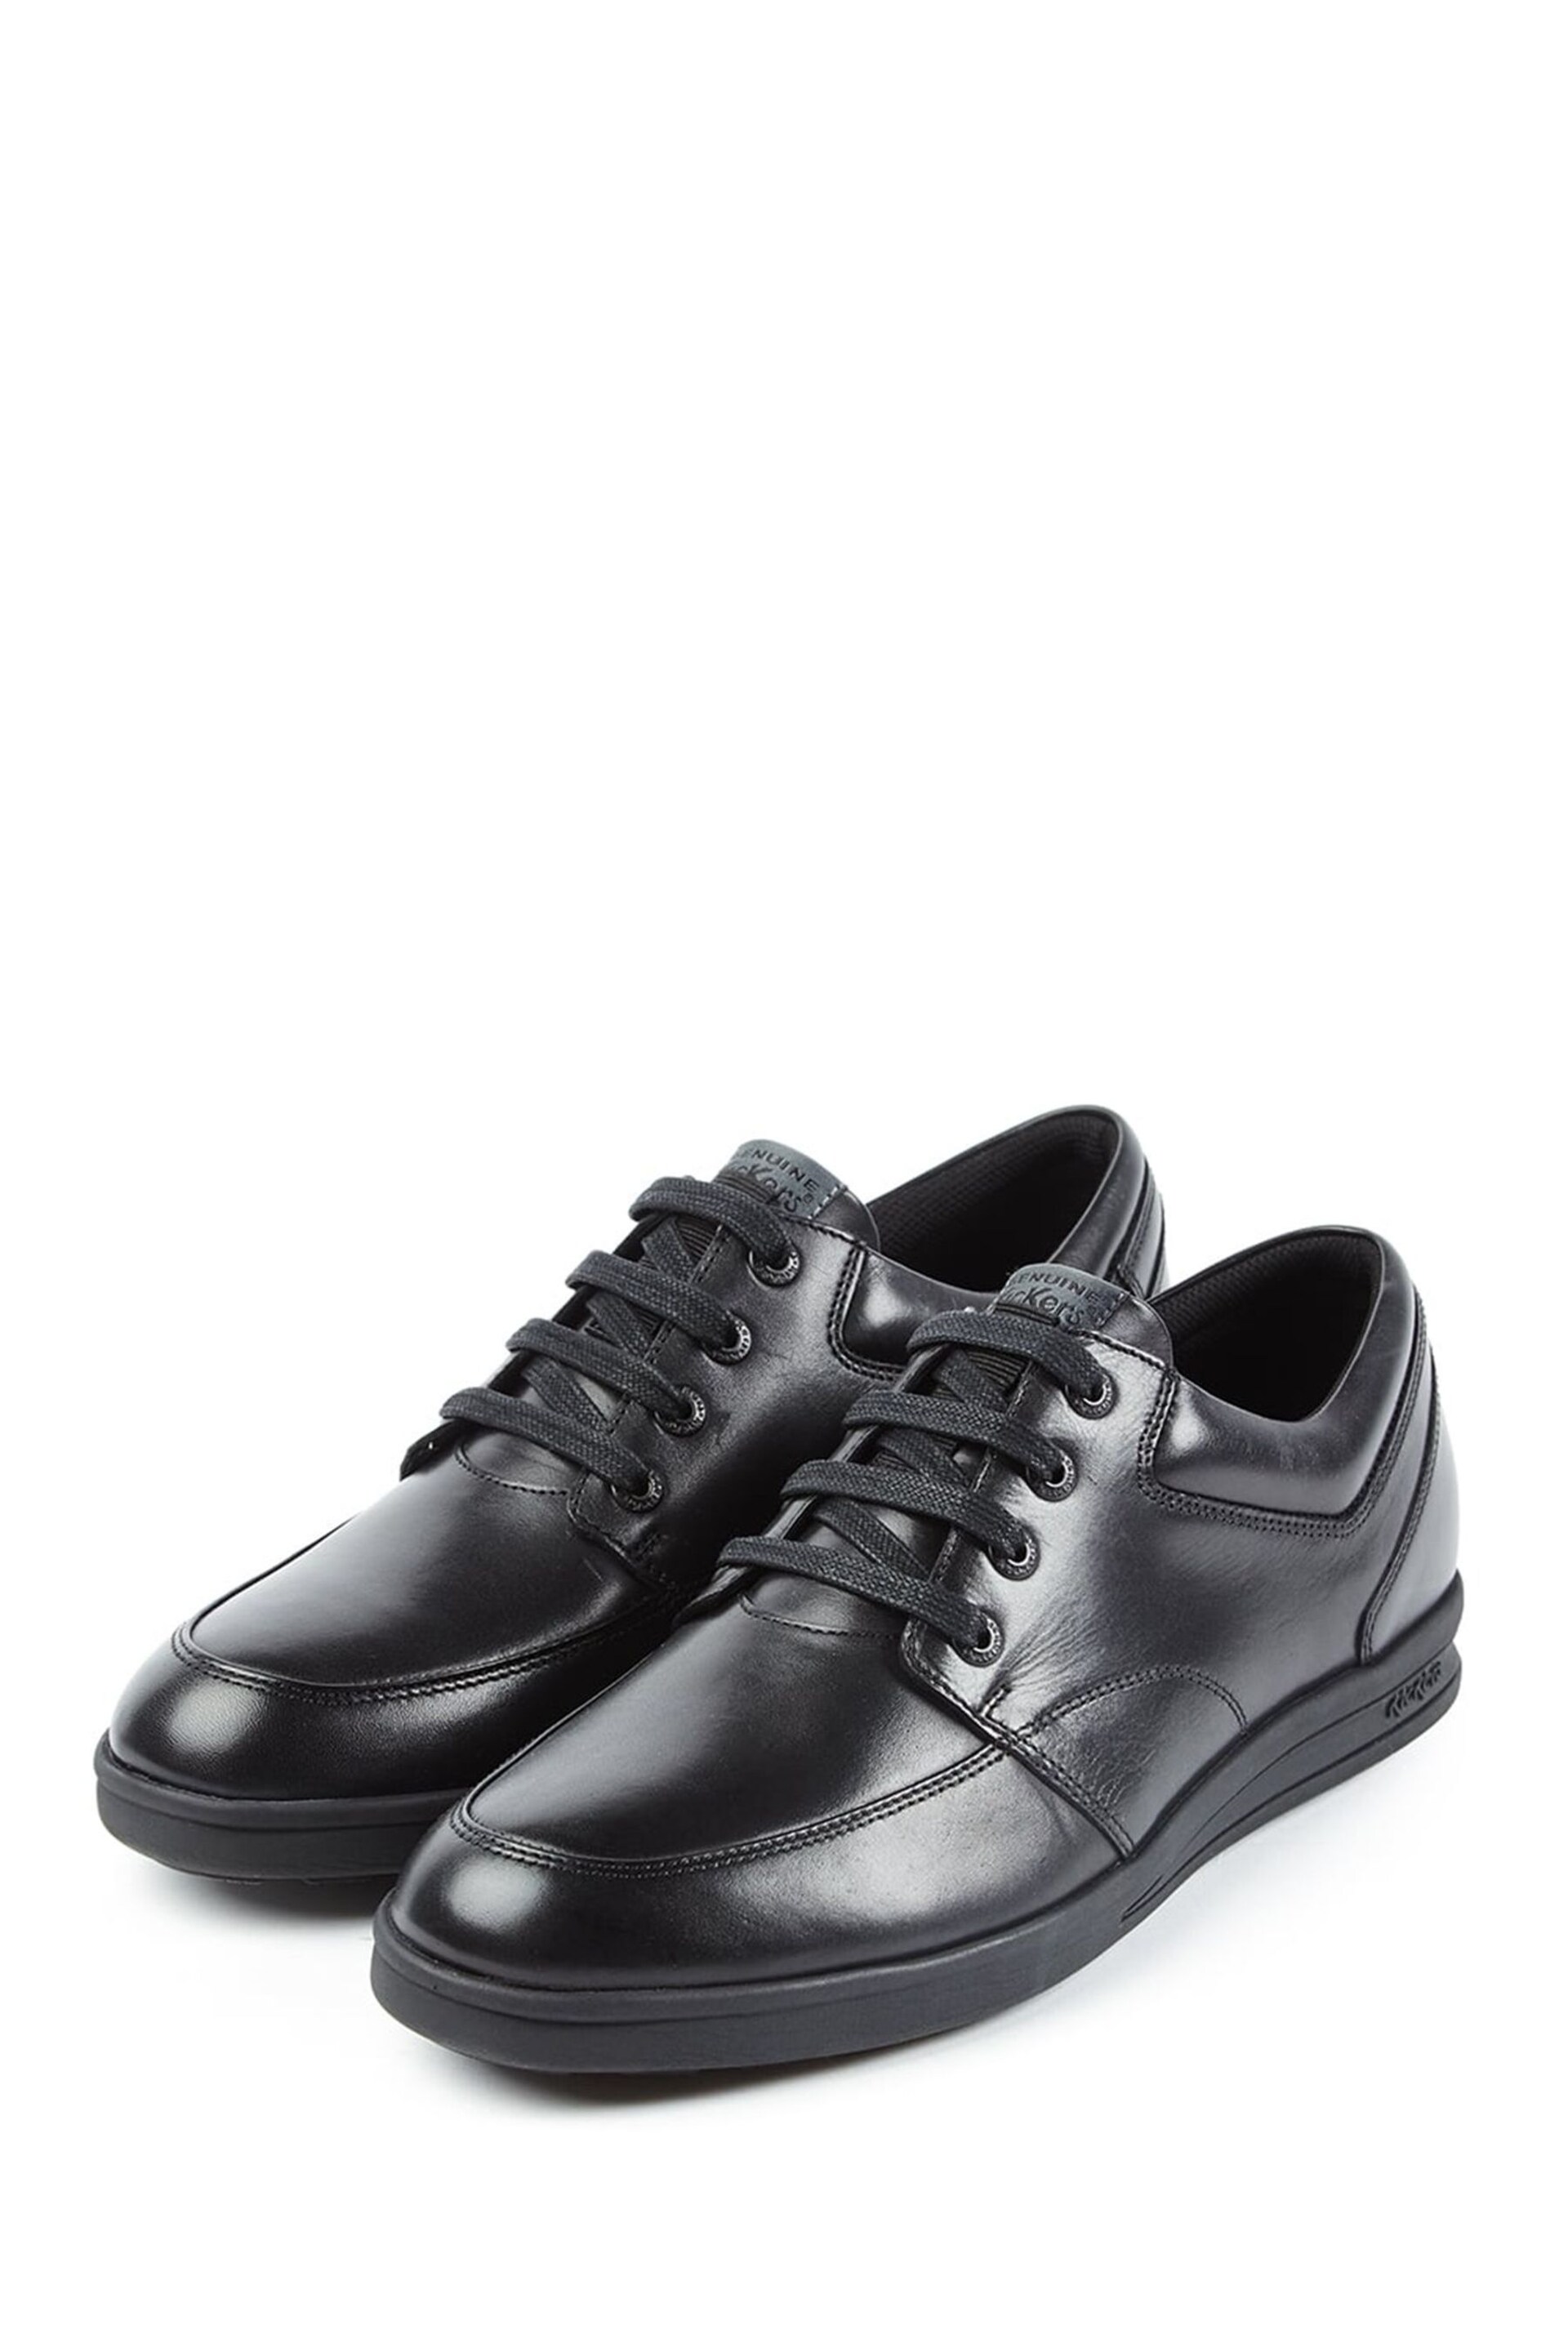 Kickers® Black Troiko Lace Shoes - Image 1 of 8